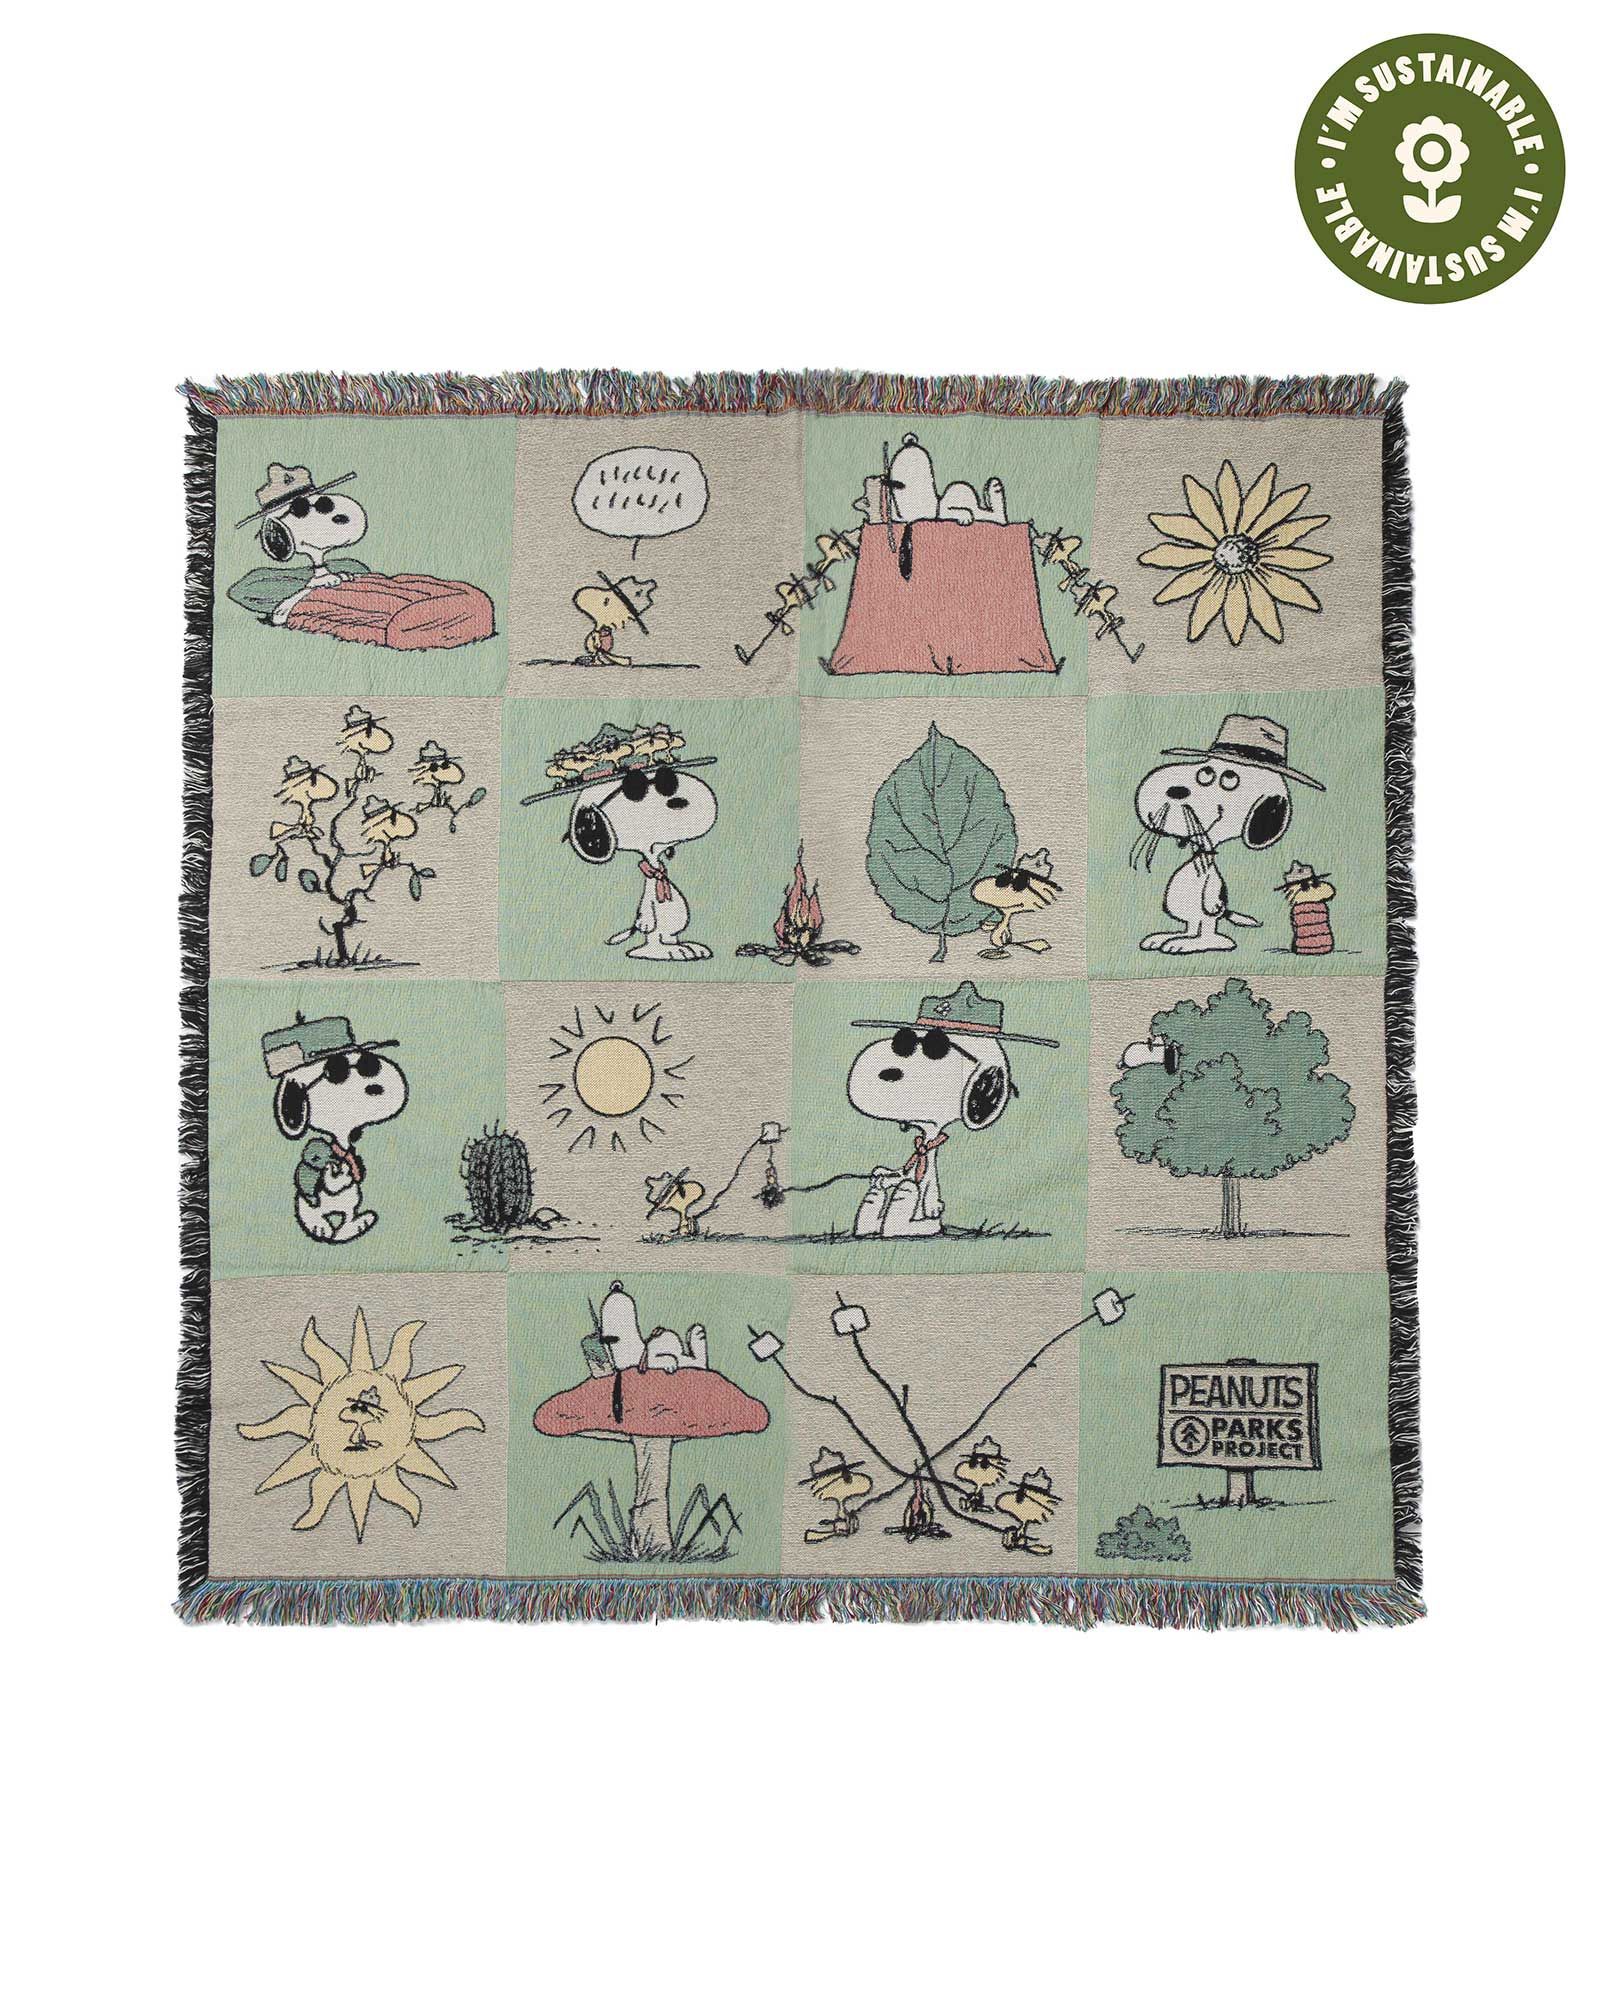 Peanuts x Parks Project Organic Cotton Blanket | Parks Project